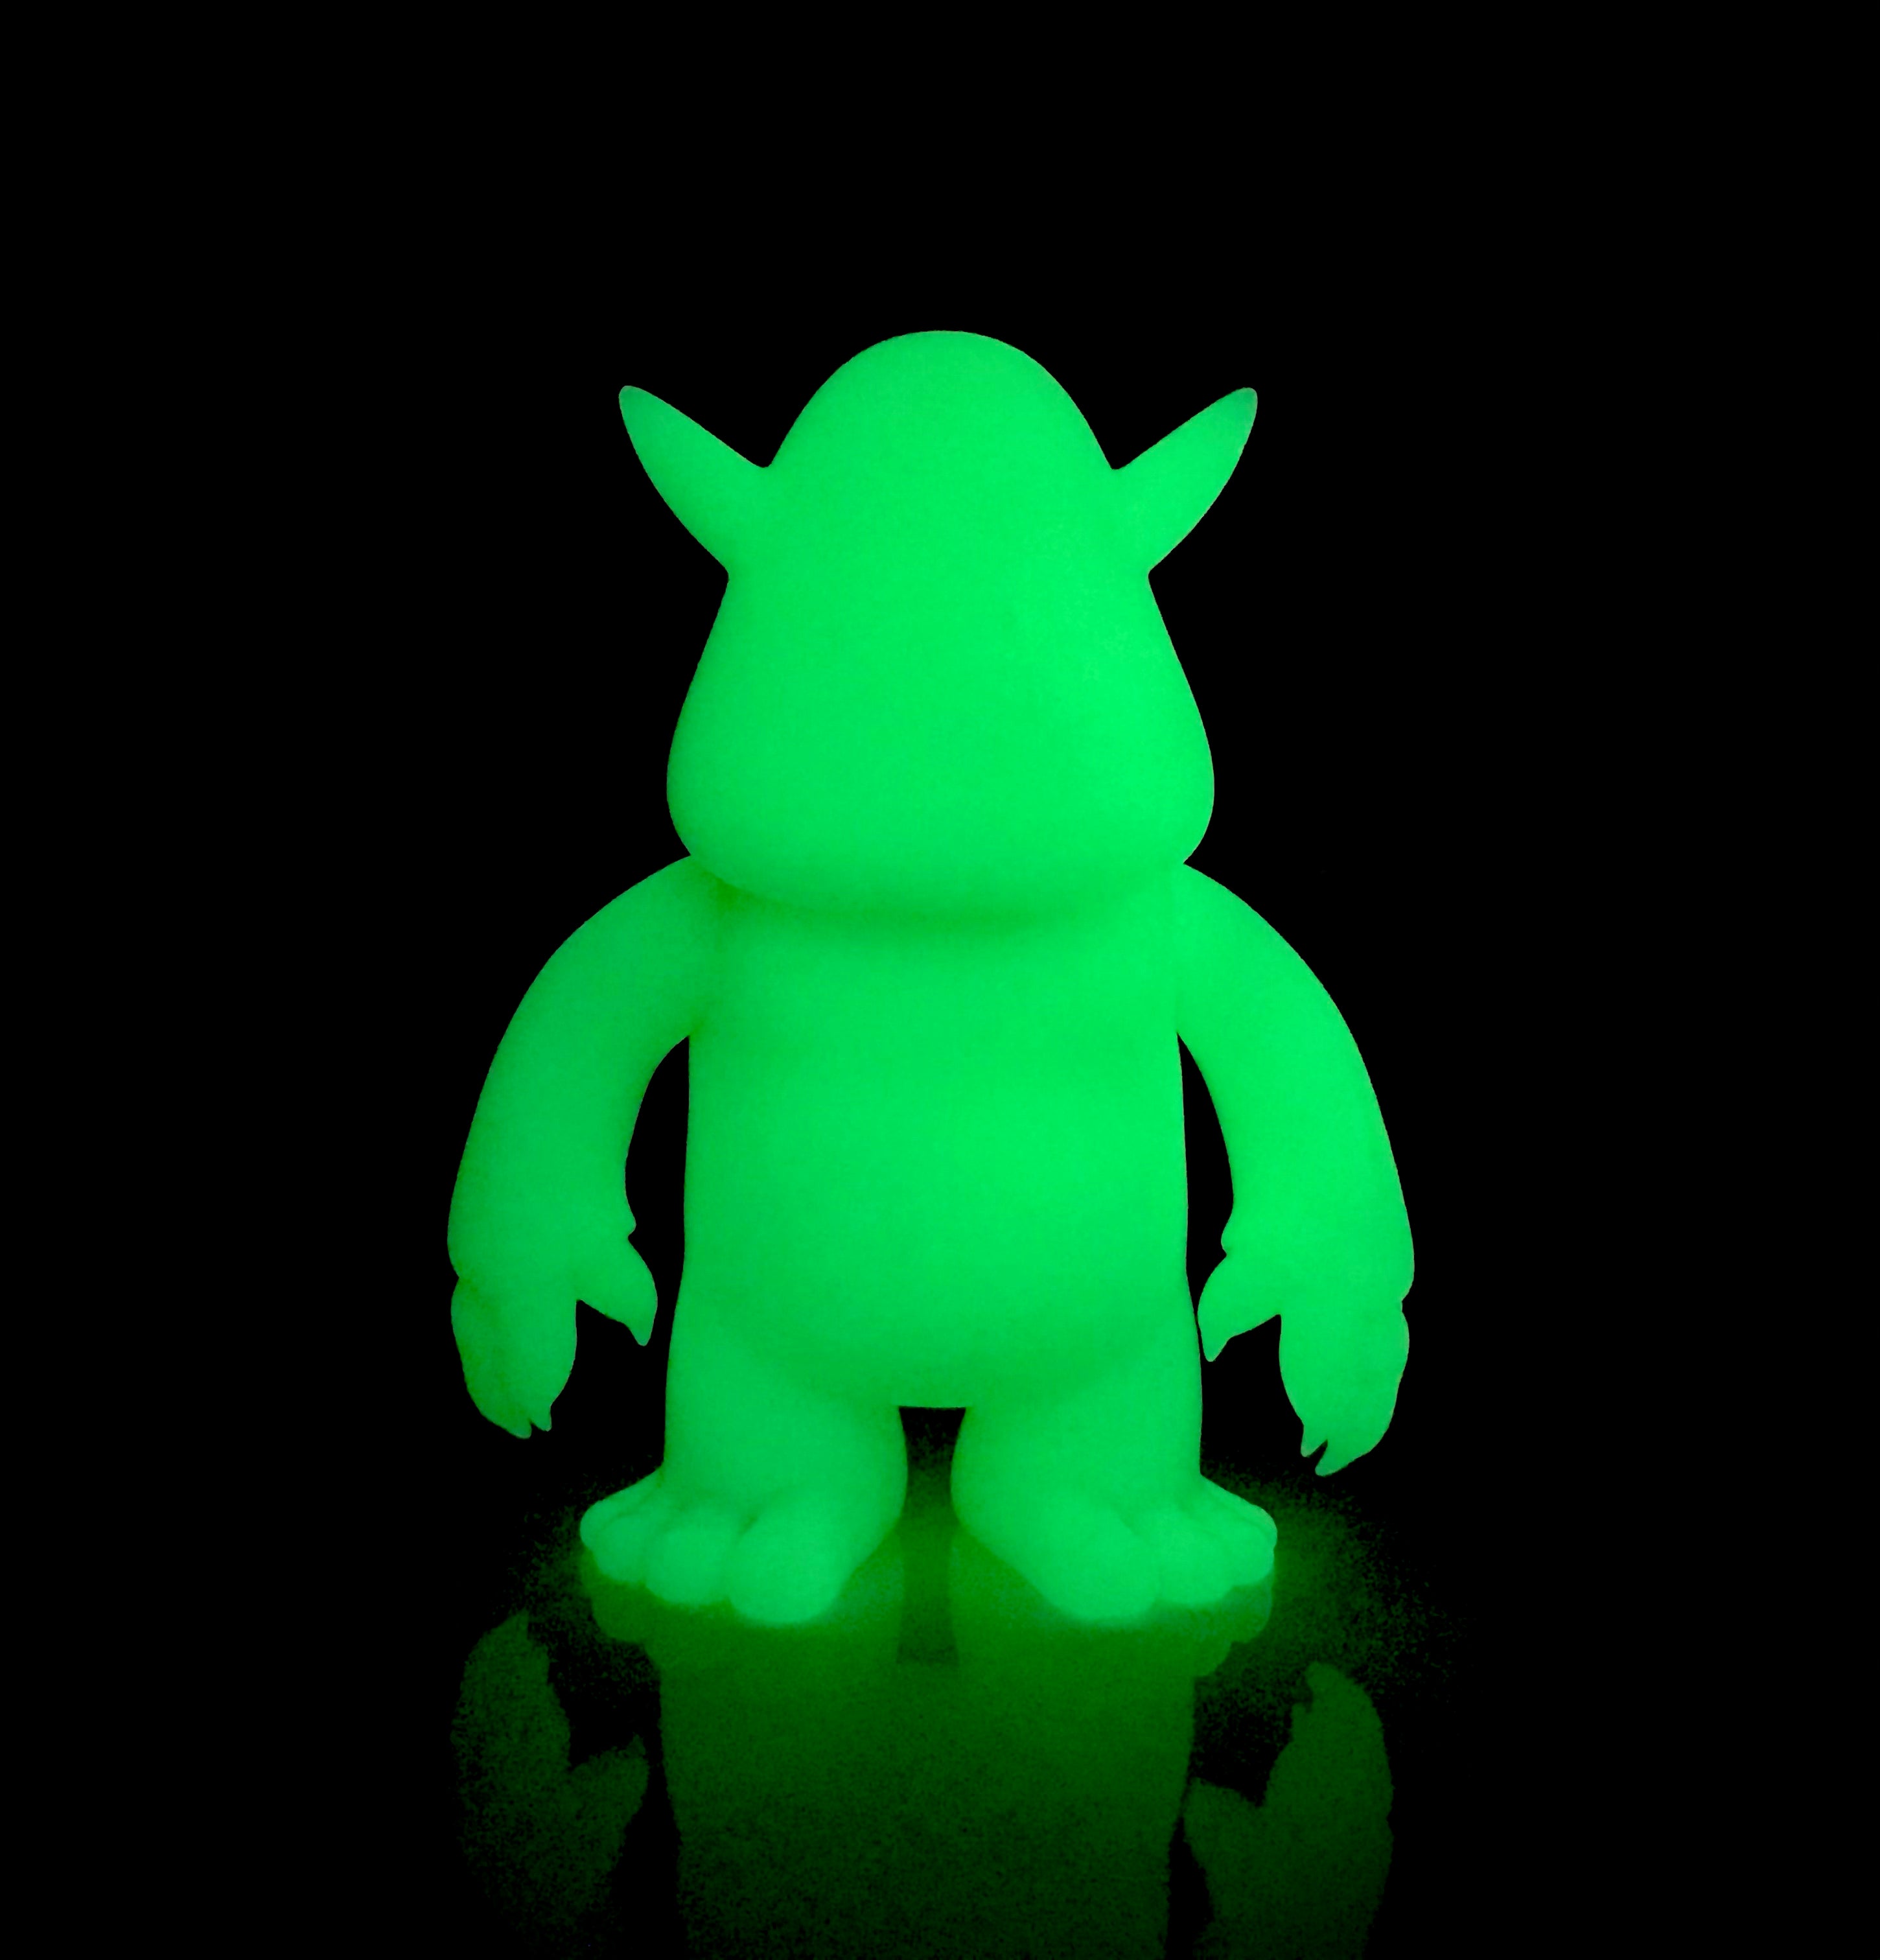 Stroll DIY GID Green Vinyl toy with hands up and glowing animal figures.